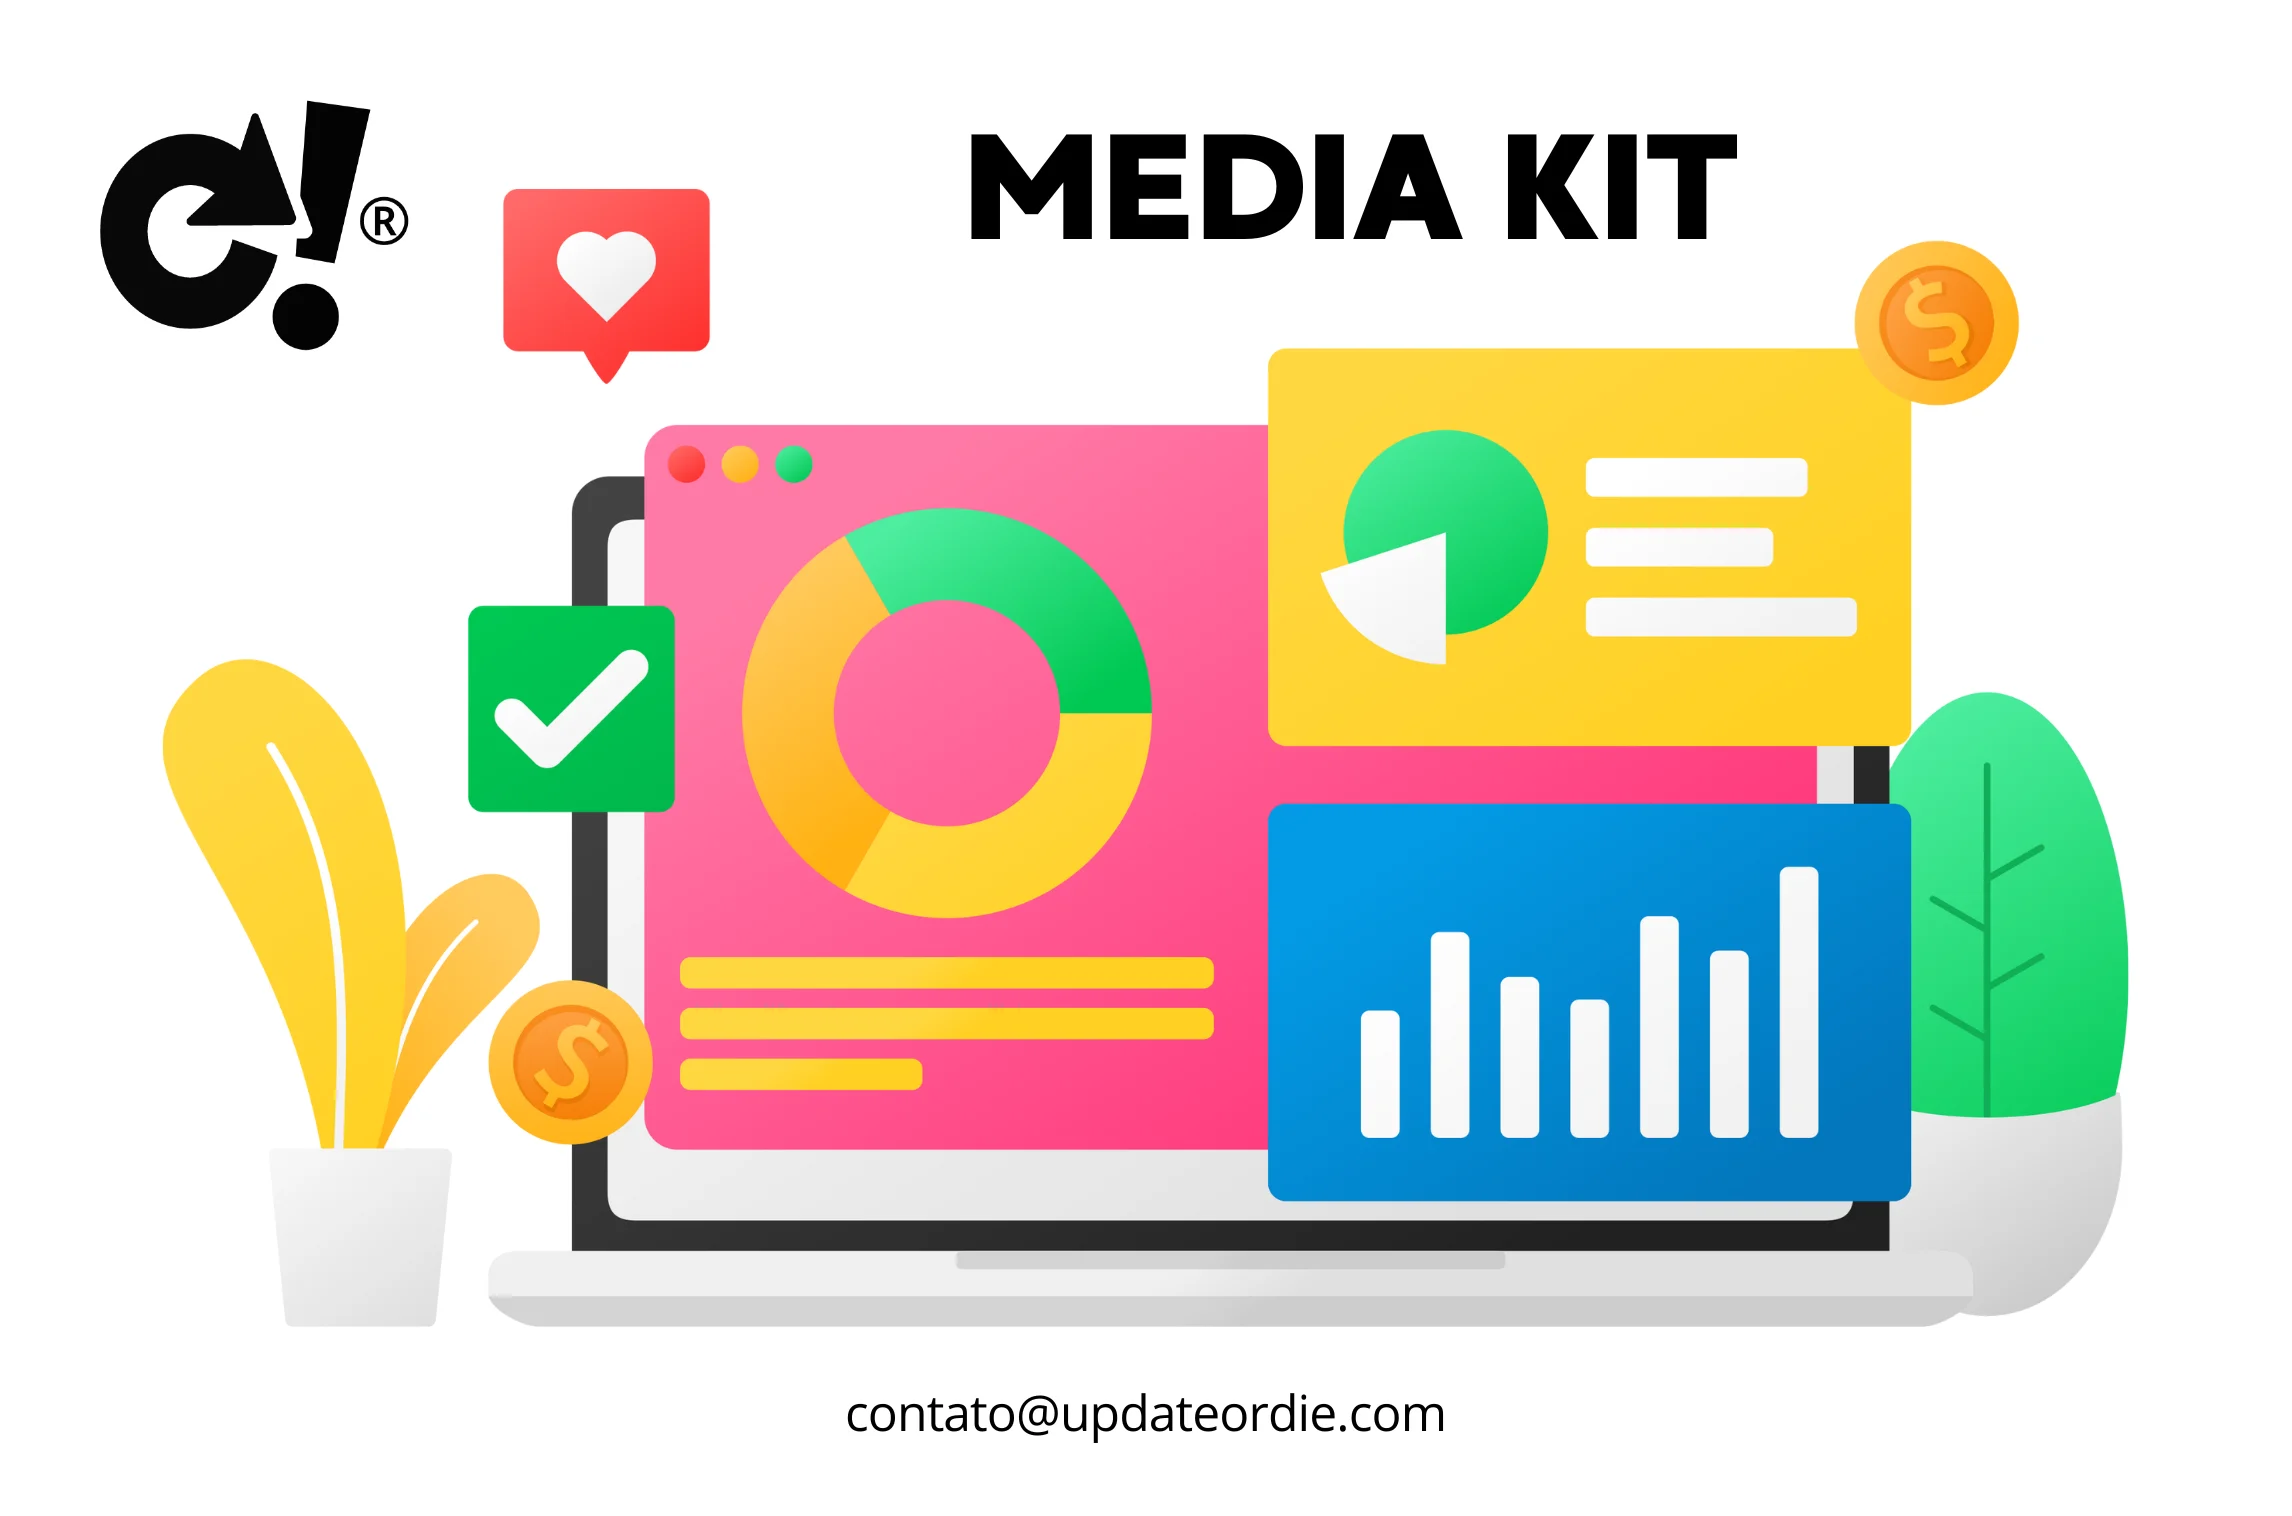 Midia kit. Colorful illustration of a media kit with graphs, charts, and branding elements displayed on desktop screen, contact email below.